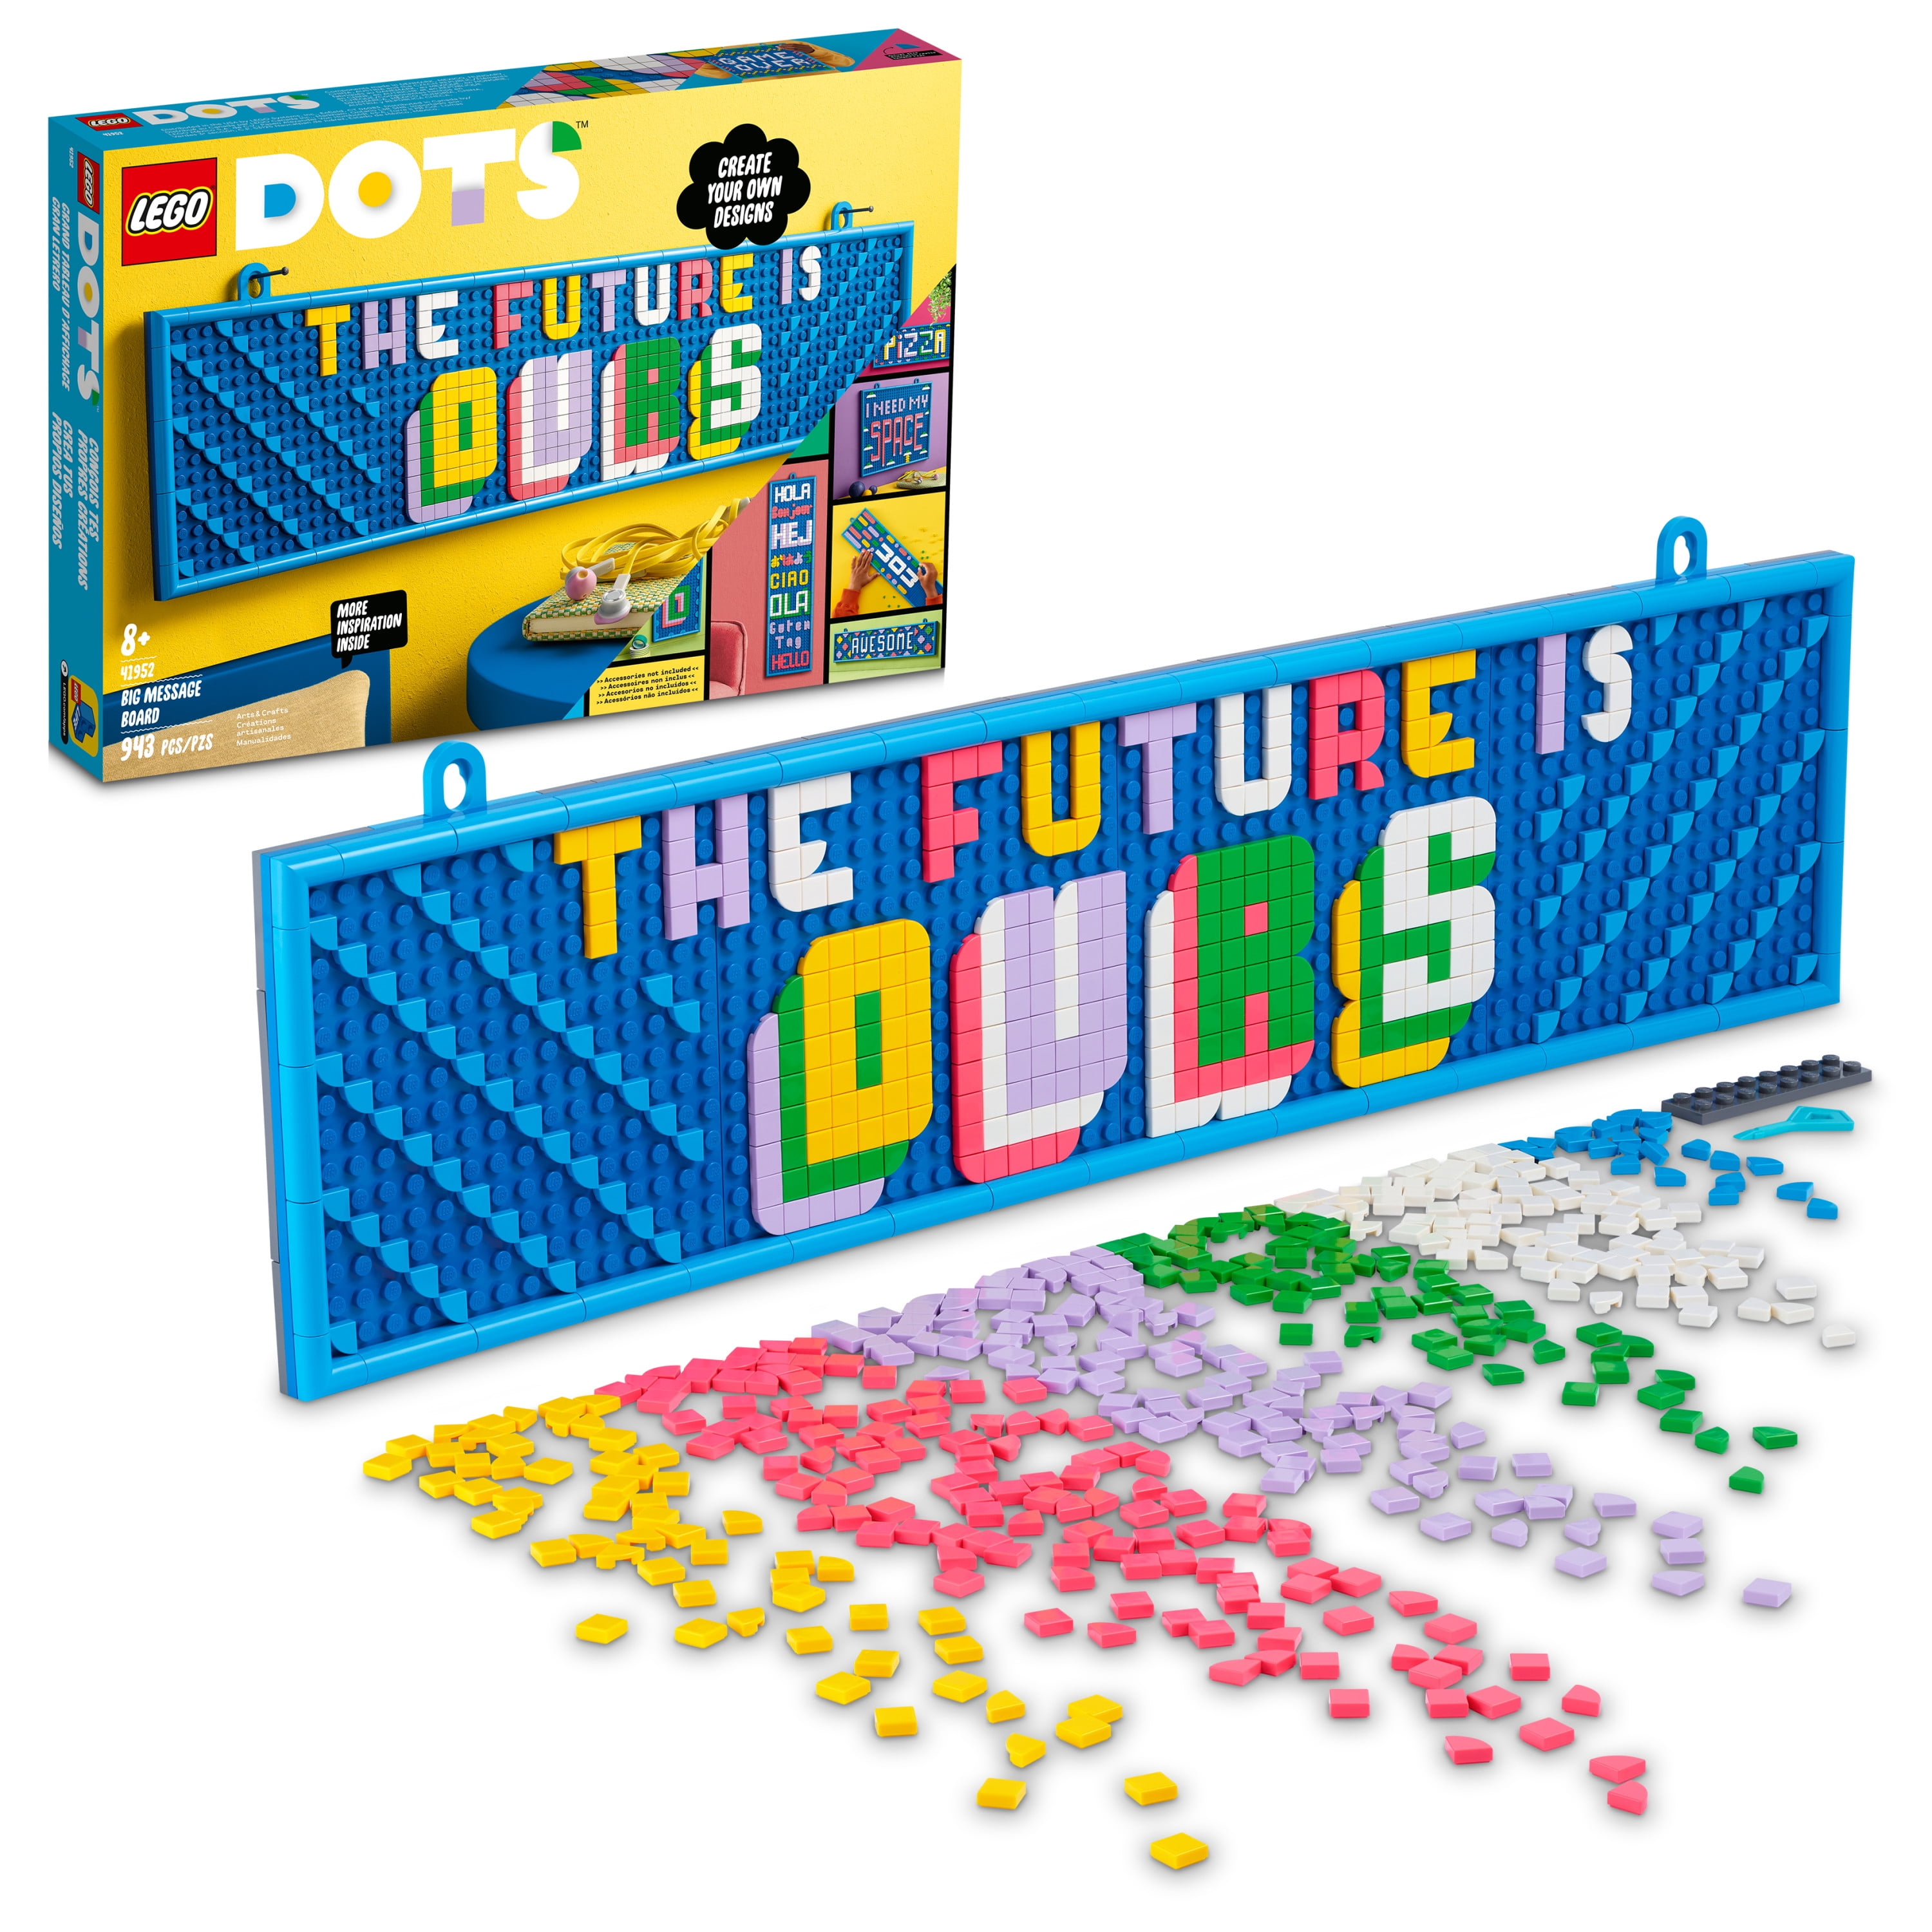 LEGO DOTS Secret Boxes 41925 DIY Craft Decorations Kit; Makes a Creative Gift for Kids Who Want to Make Cool Designs New 2021 273 Pieces 